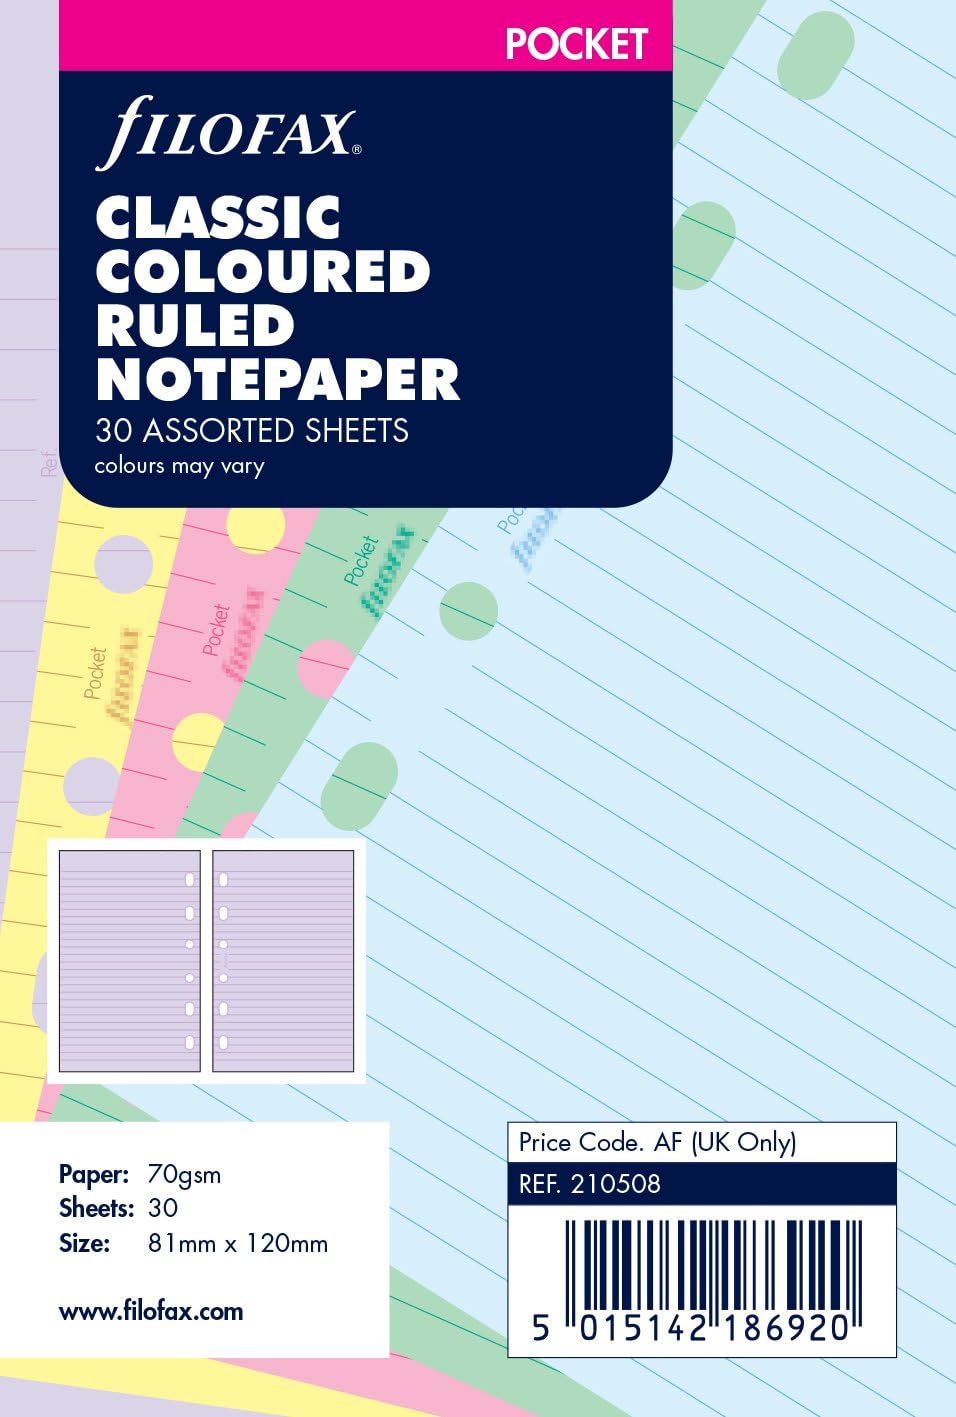 Filofax Pocket Classic Coloured Ruled Notepaper 30 Sheets 81 x 120mm RRP £3.73 CLEARANCE XL £1.99